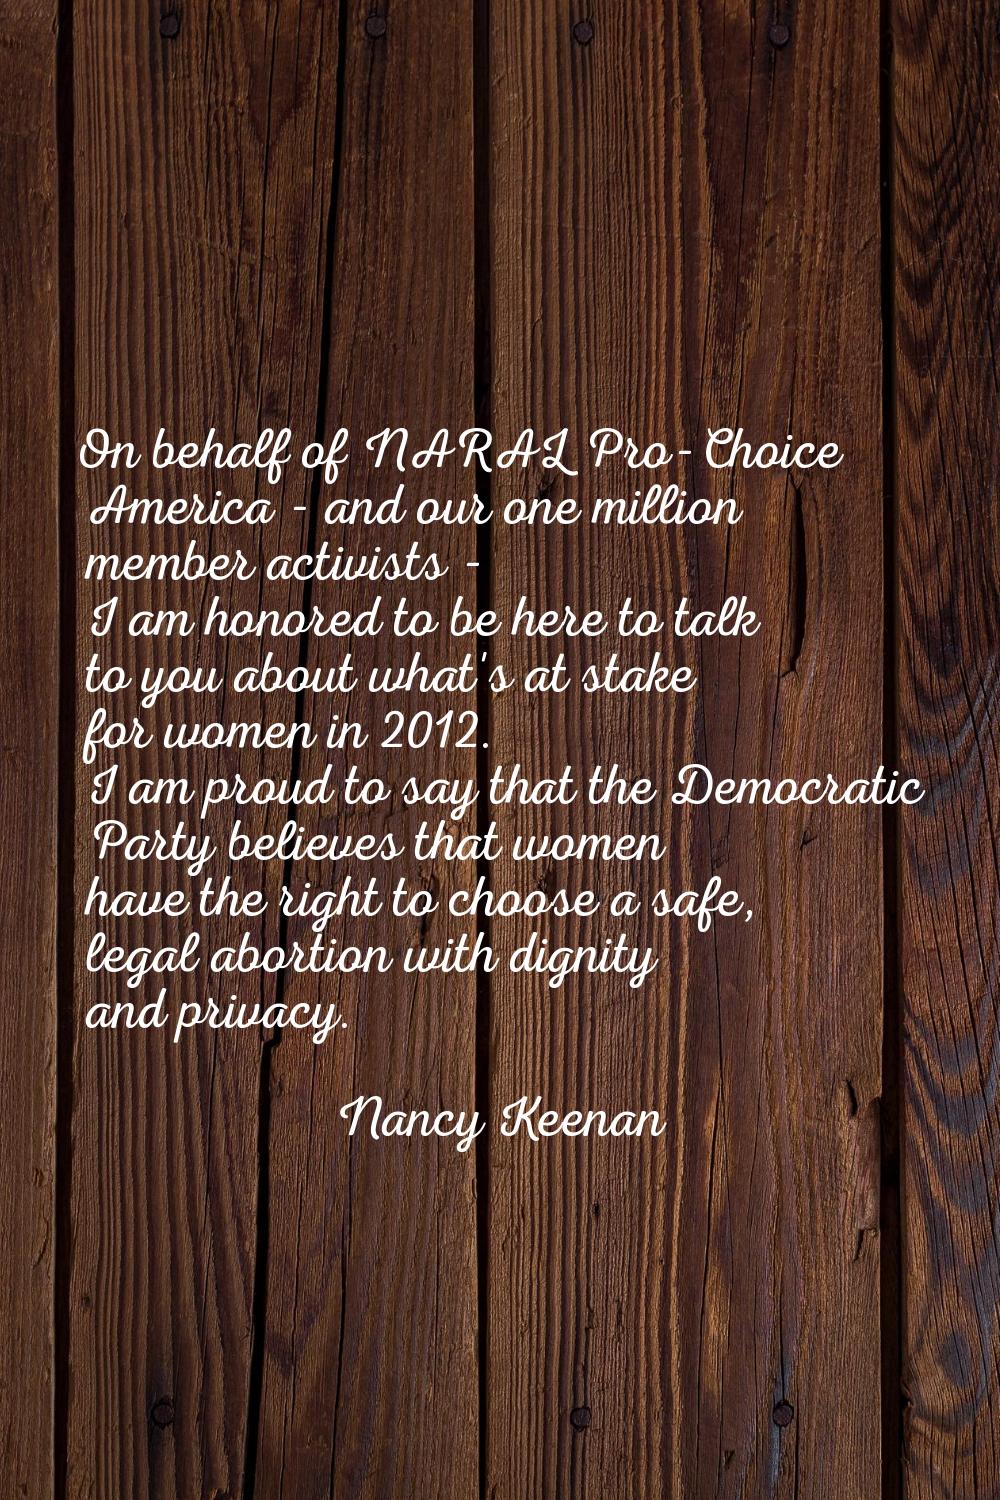 On behalf of NARAL Pro-Choice America - and our one million member activists - I am honored to be h